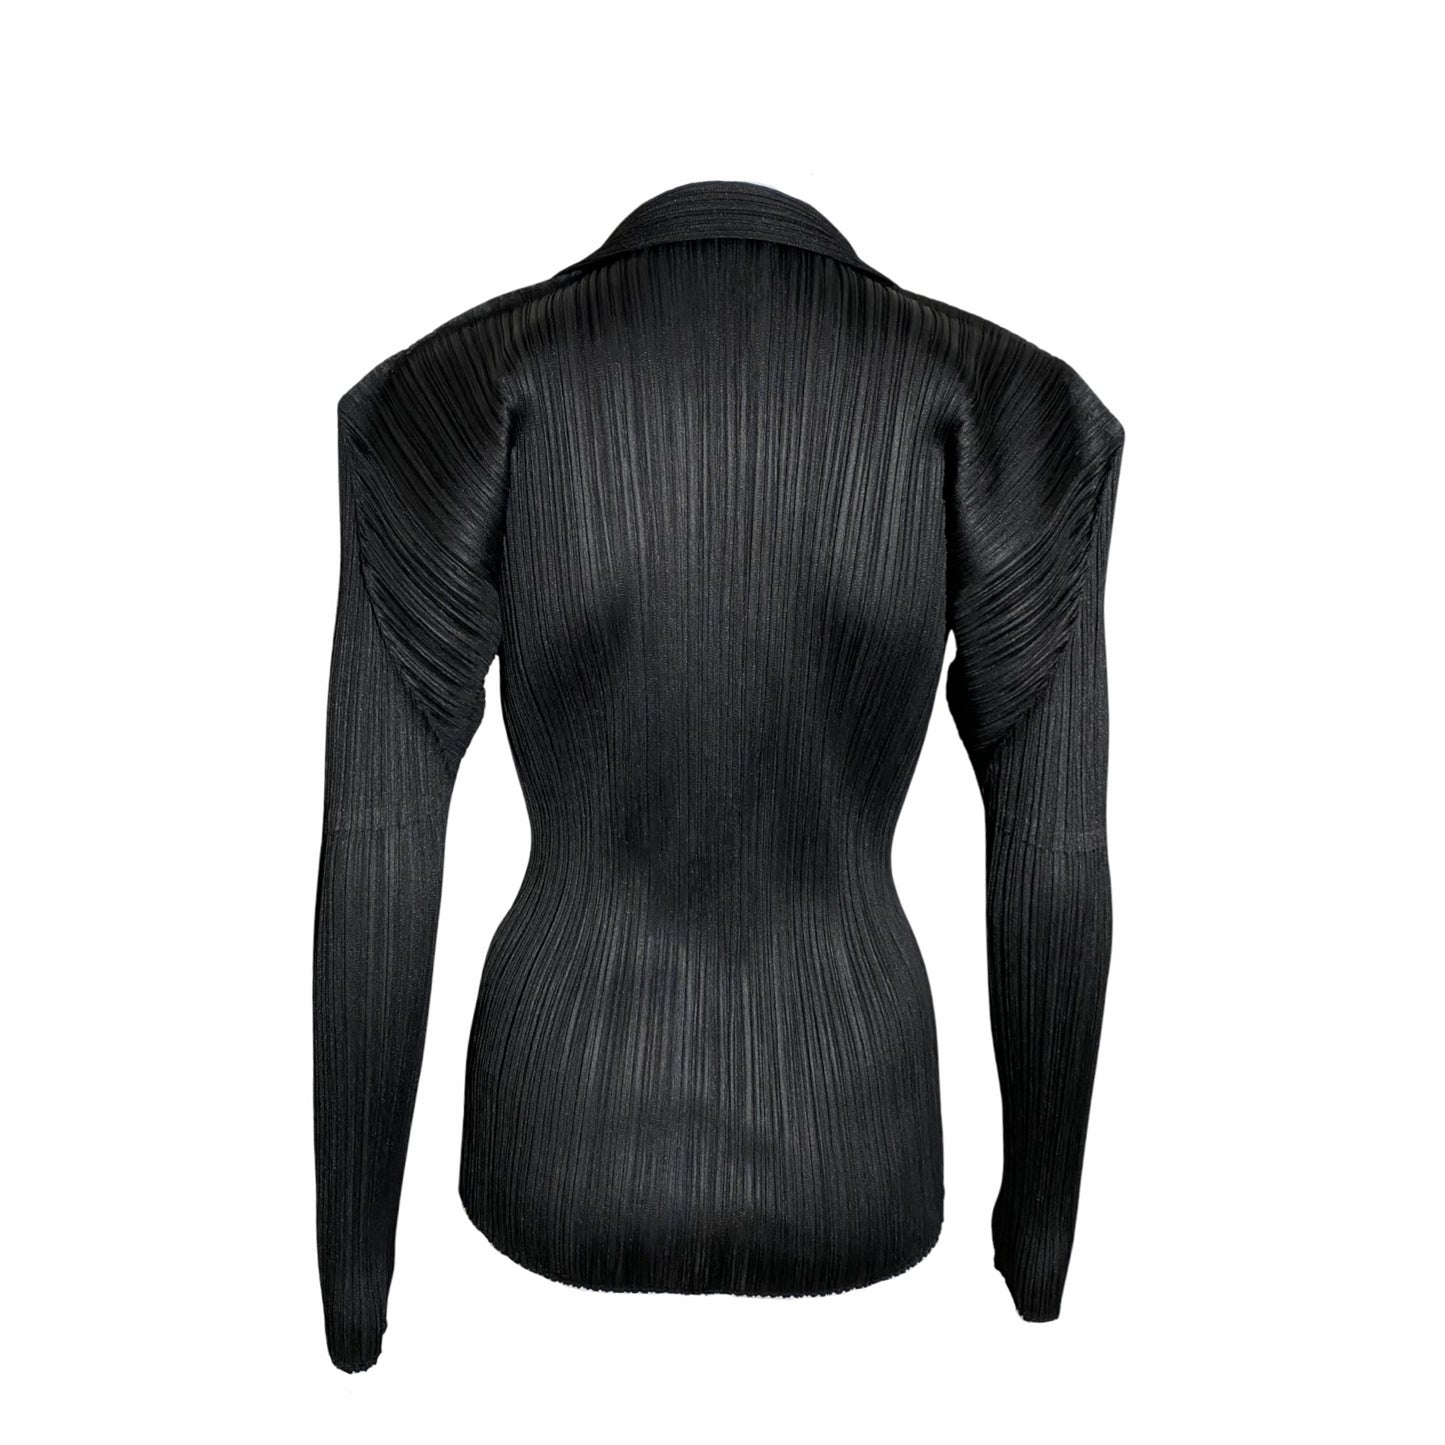 Issey Miyake Pleats Please Black Blouse Button-up Shirt